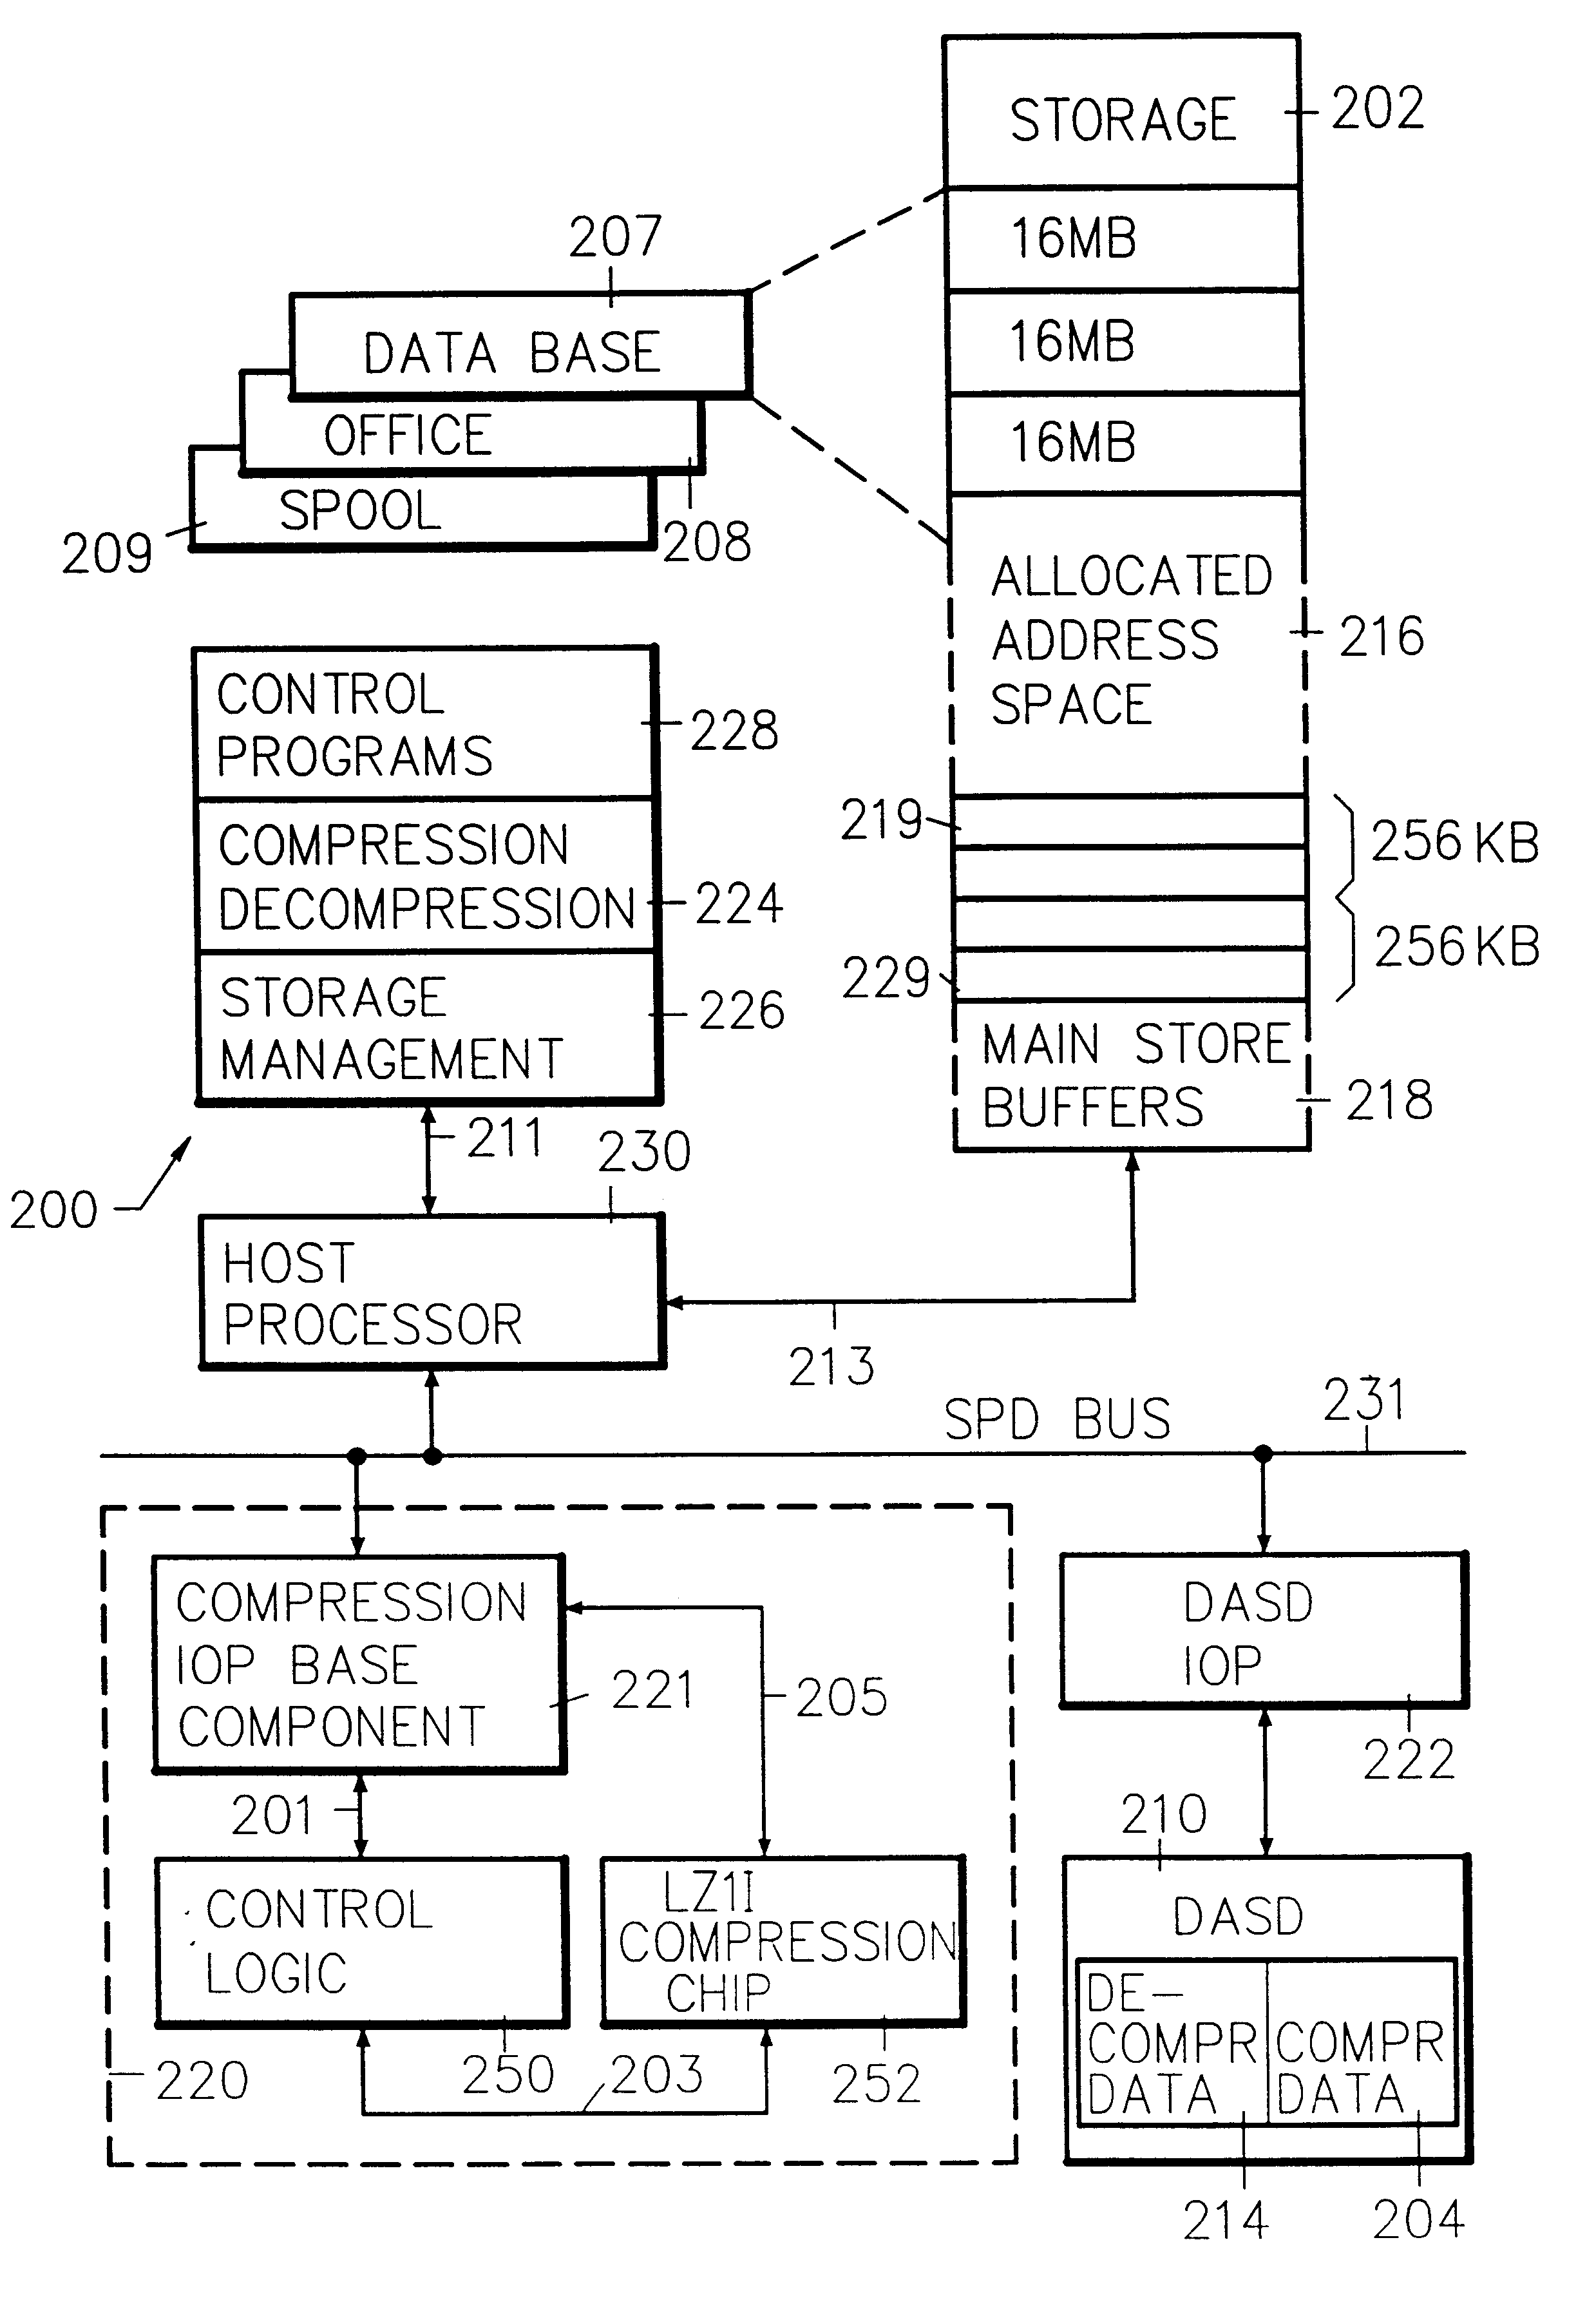 Dedicated input/output processor method and apparatus for access and storage of compressed data